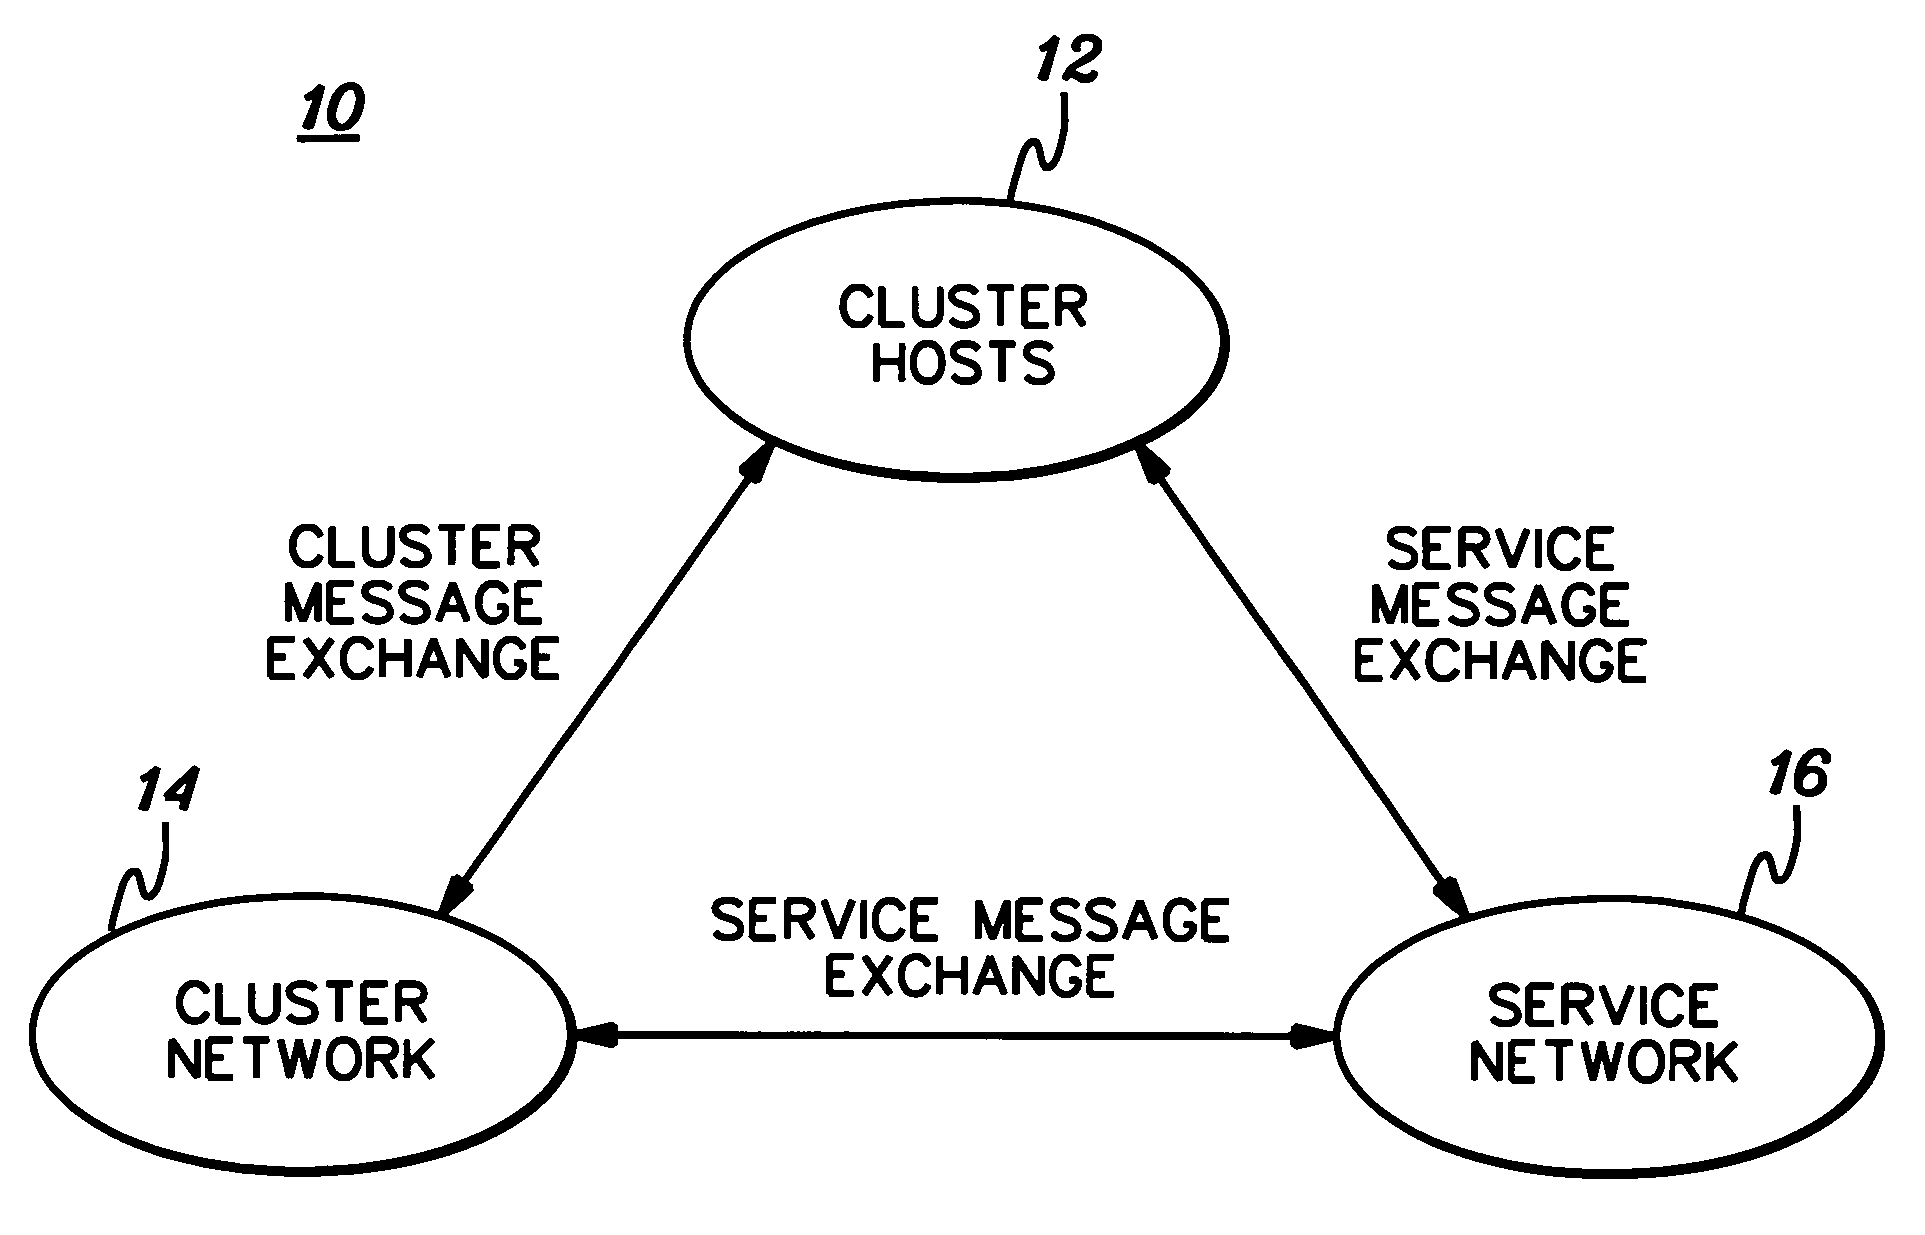 Reliable message transfer over an unreliable network